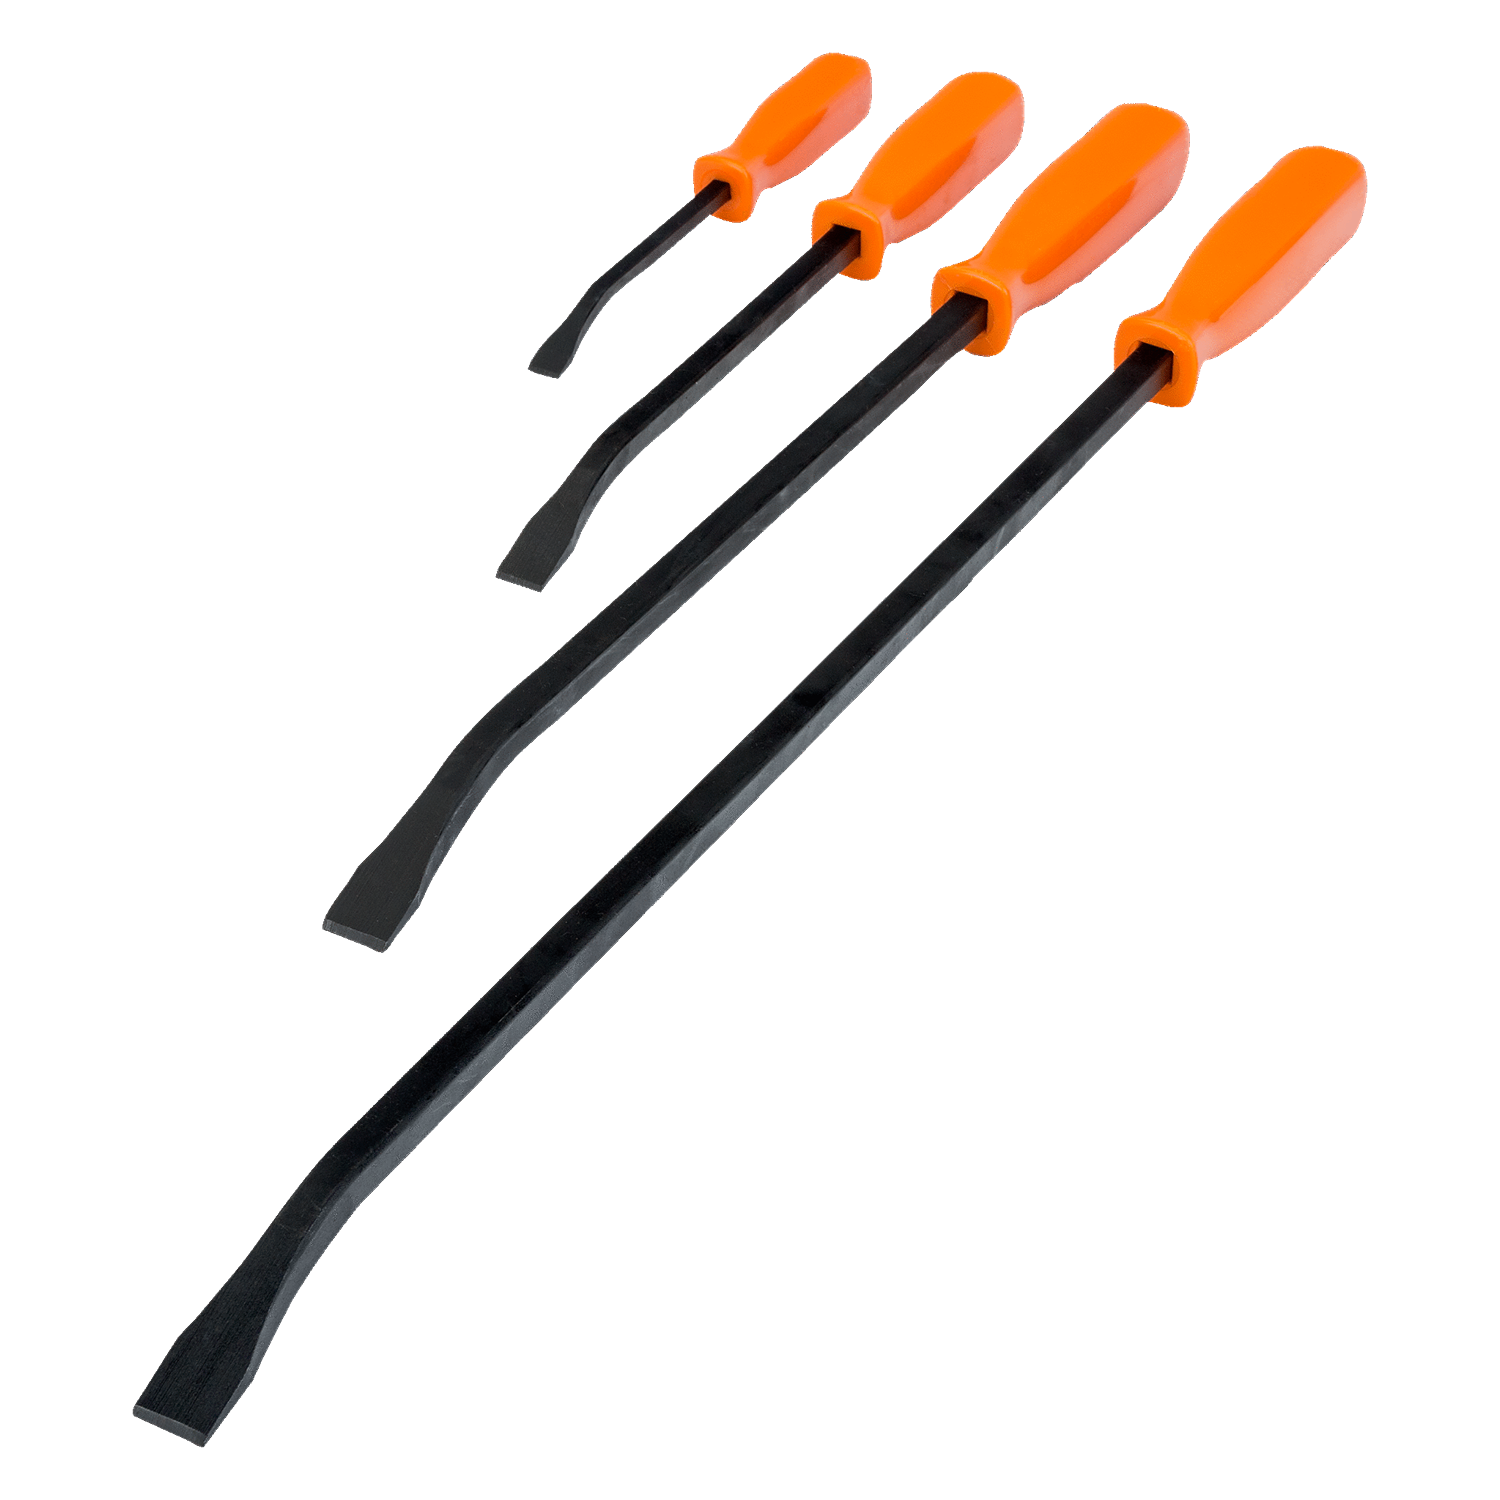 BAHCO 2484/S4 Flat Head Pry Bars Set with PP Handle (BAHCO Tools) - Premium Pry Bars from BAHCO - Shop now at Yew Aik.